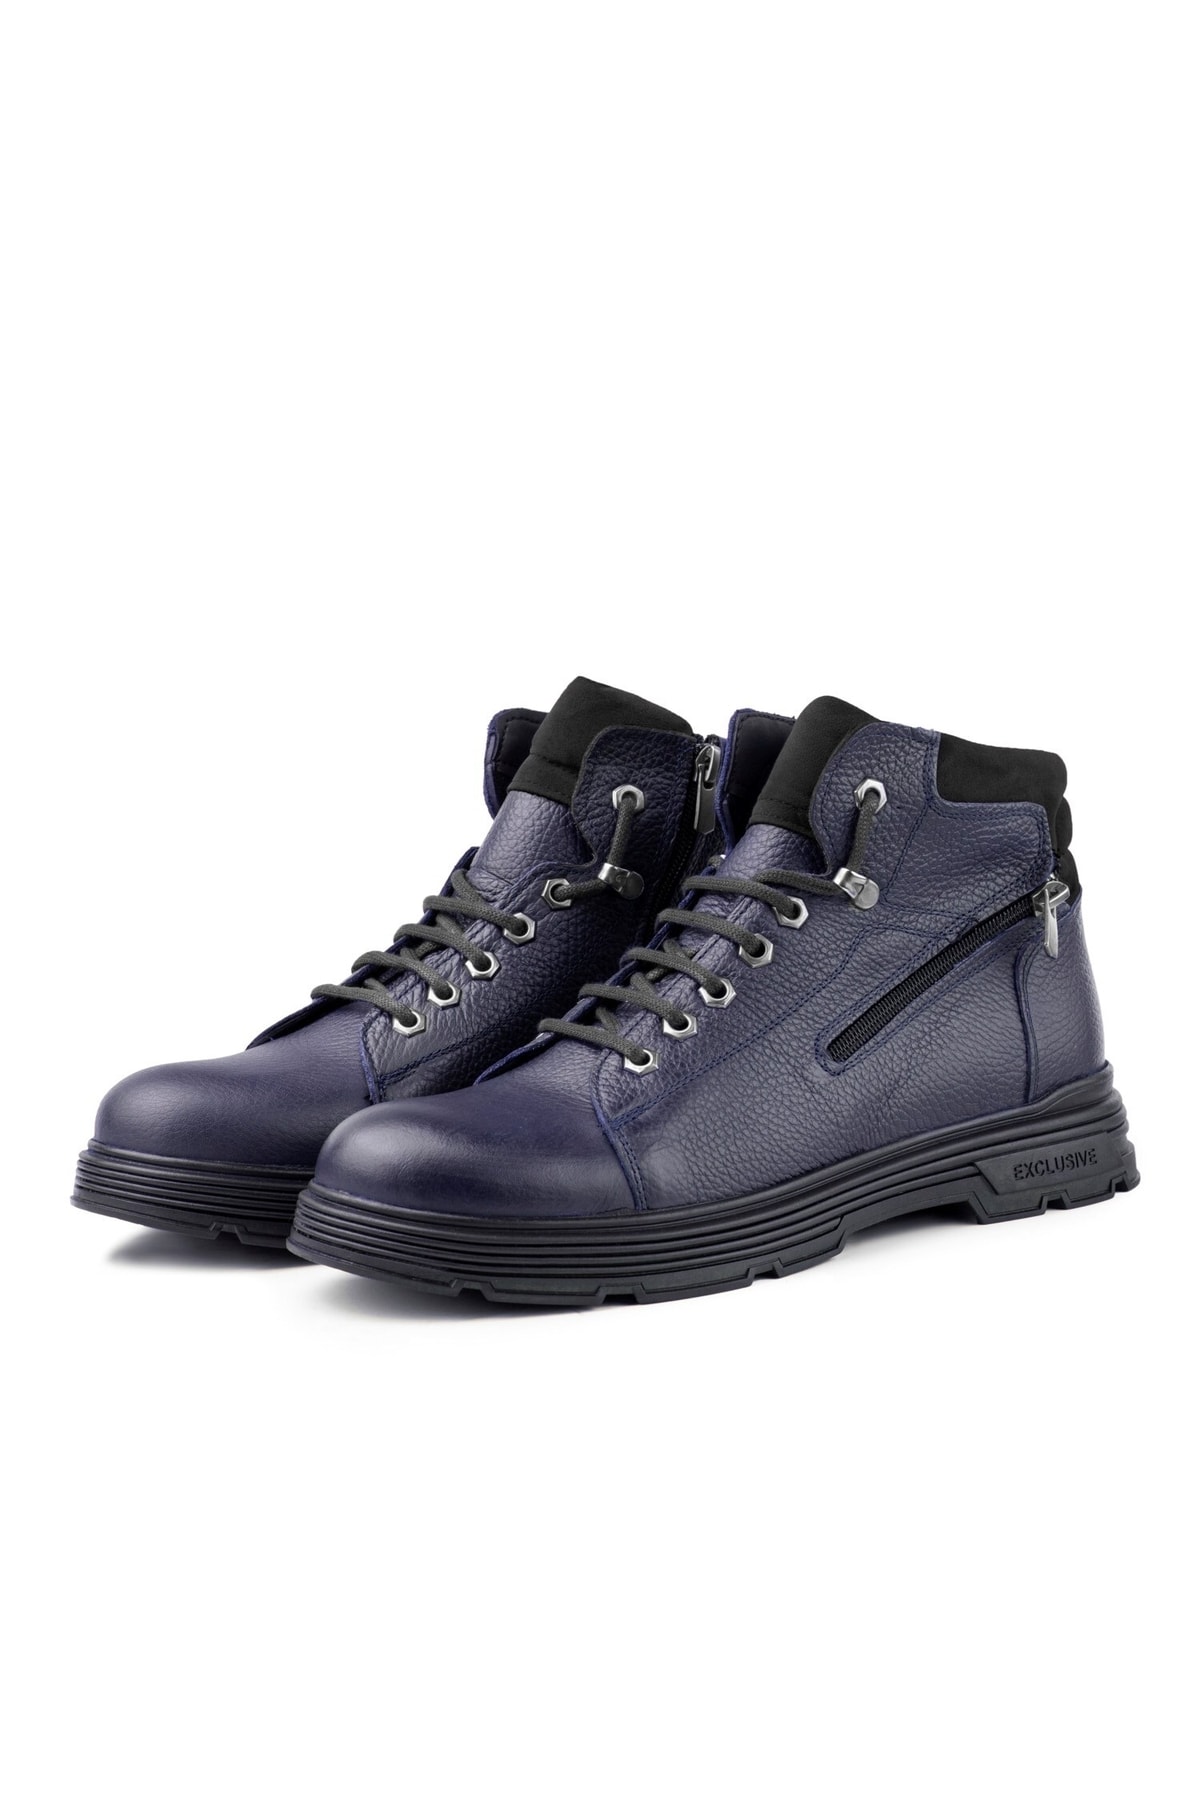 Levně Ducavelli Ankle Genuine Leather Lace-up Rubber Sole Men's Boots, Zippered Boots.